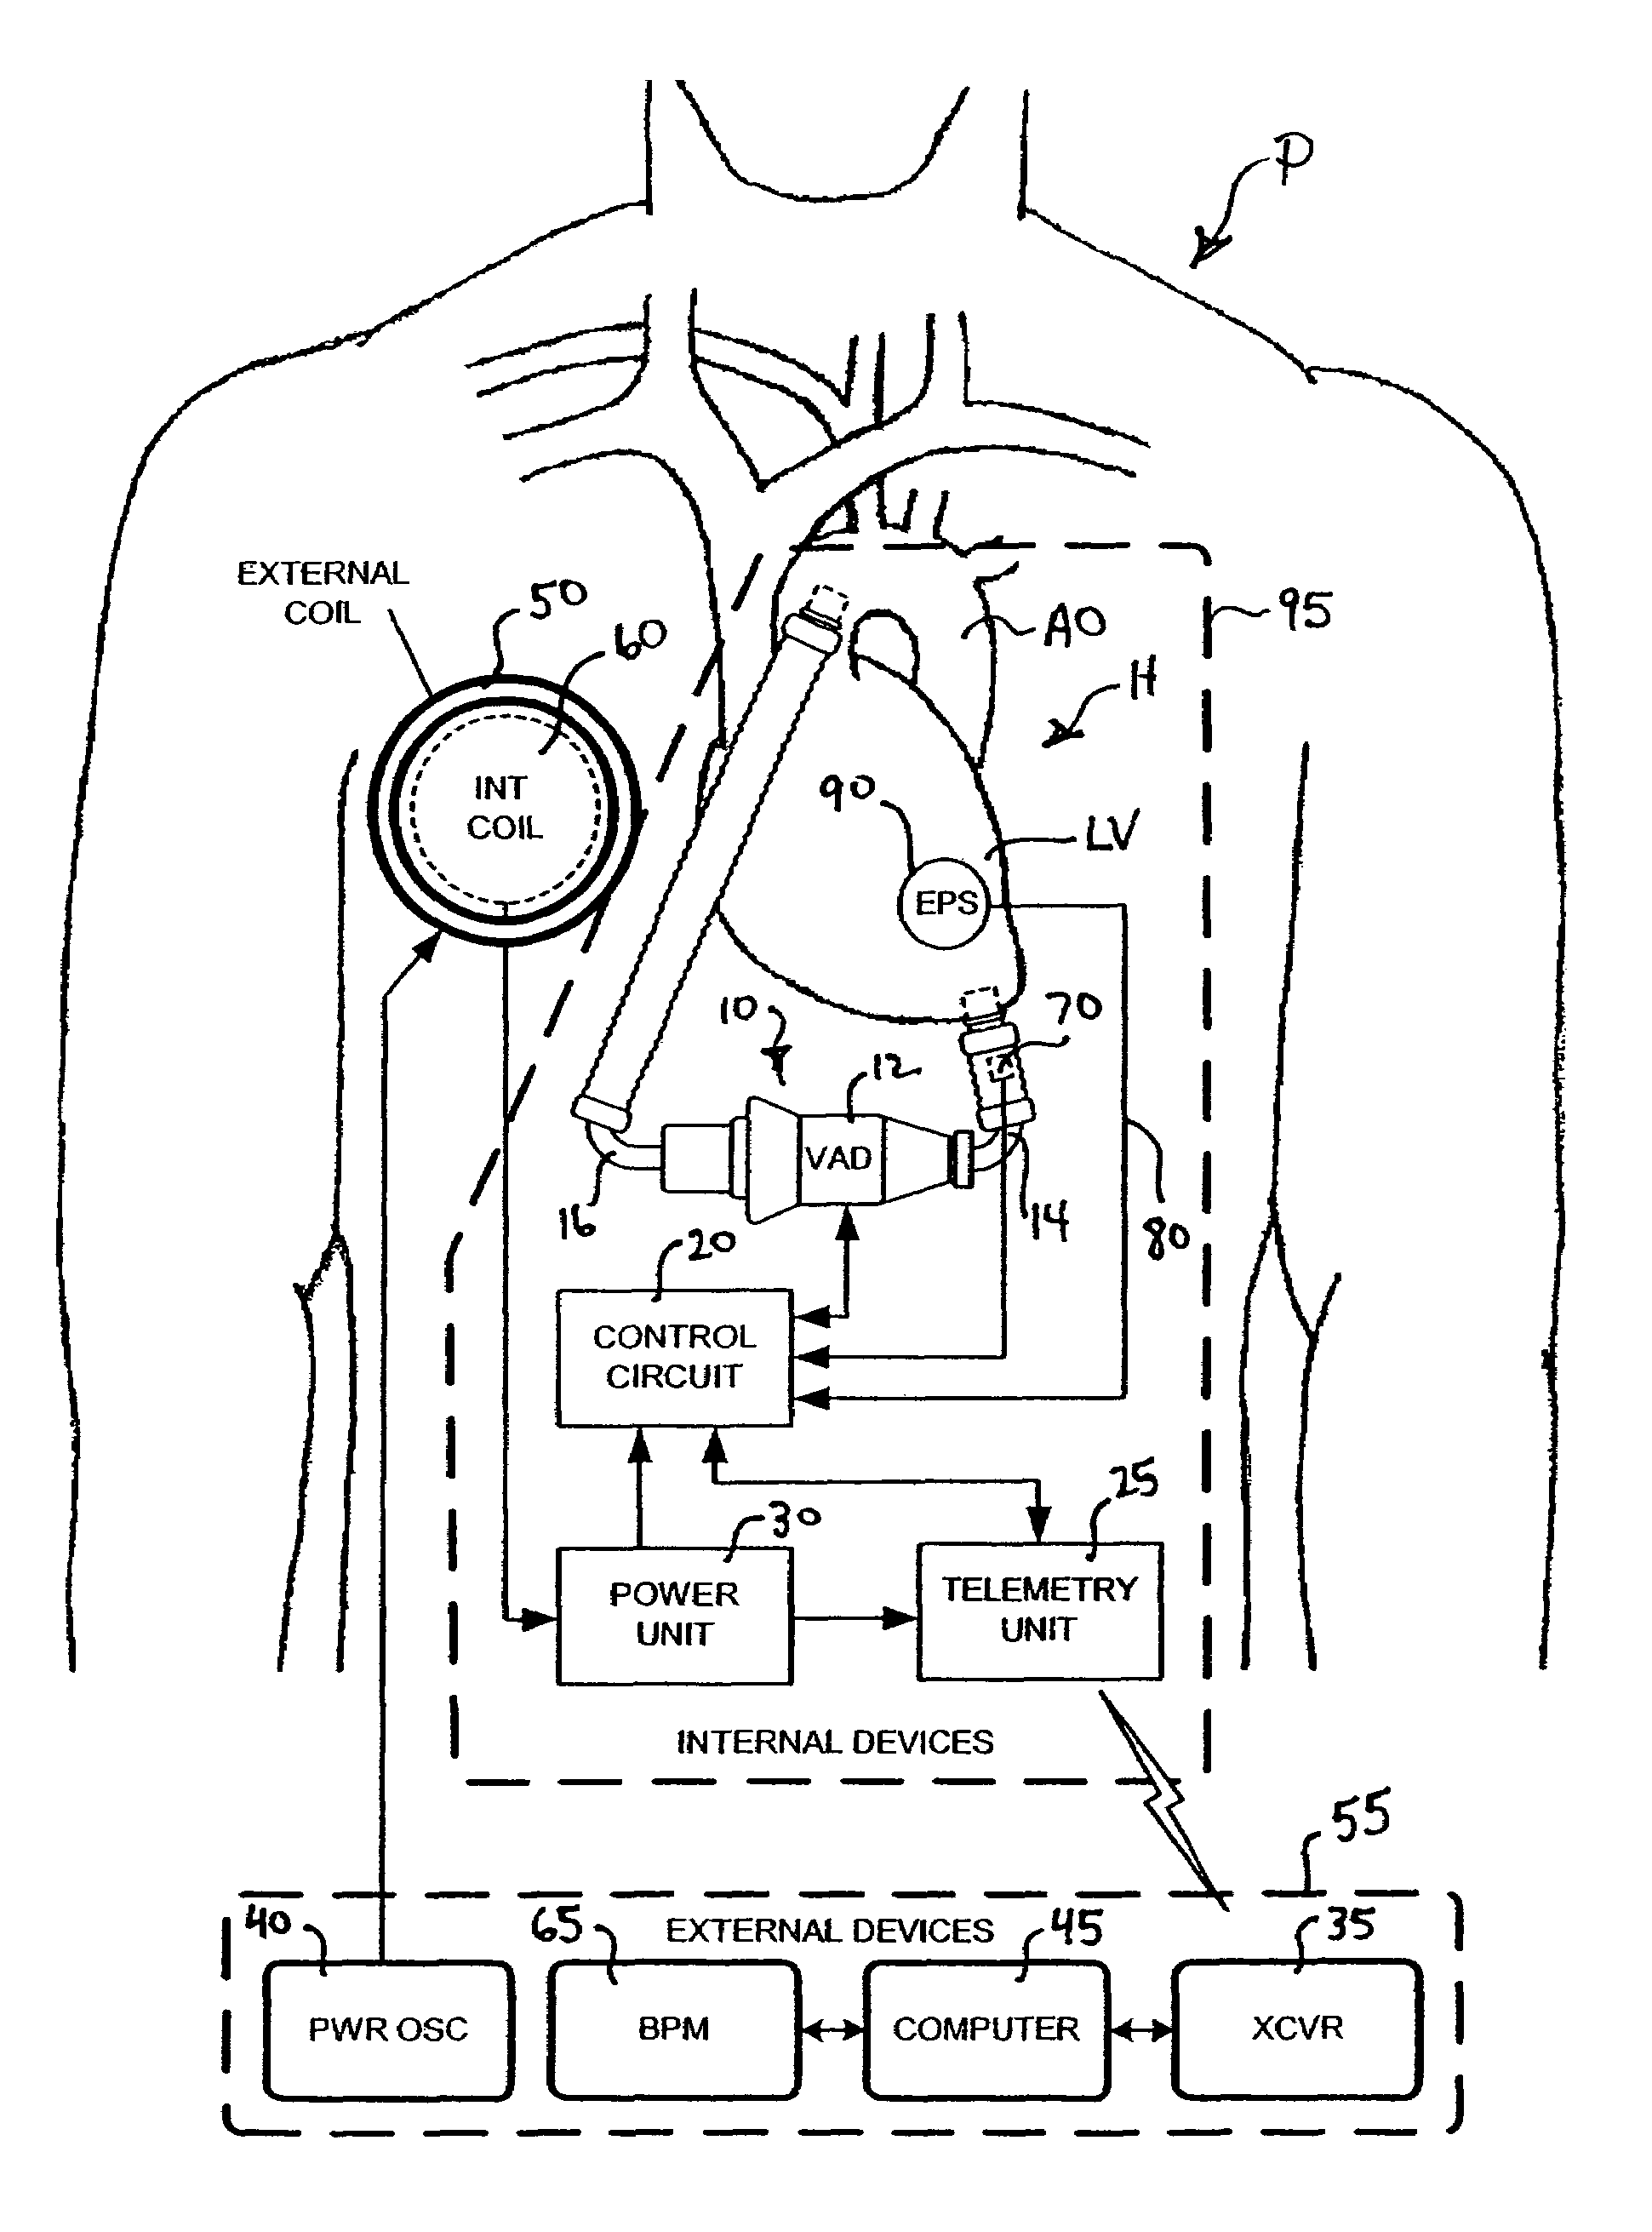 Feedback control and ventricular assist devices